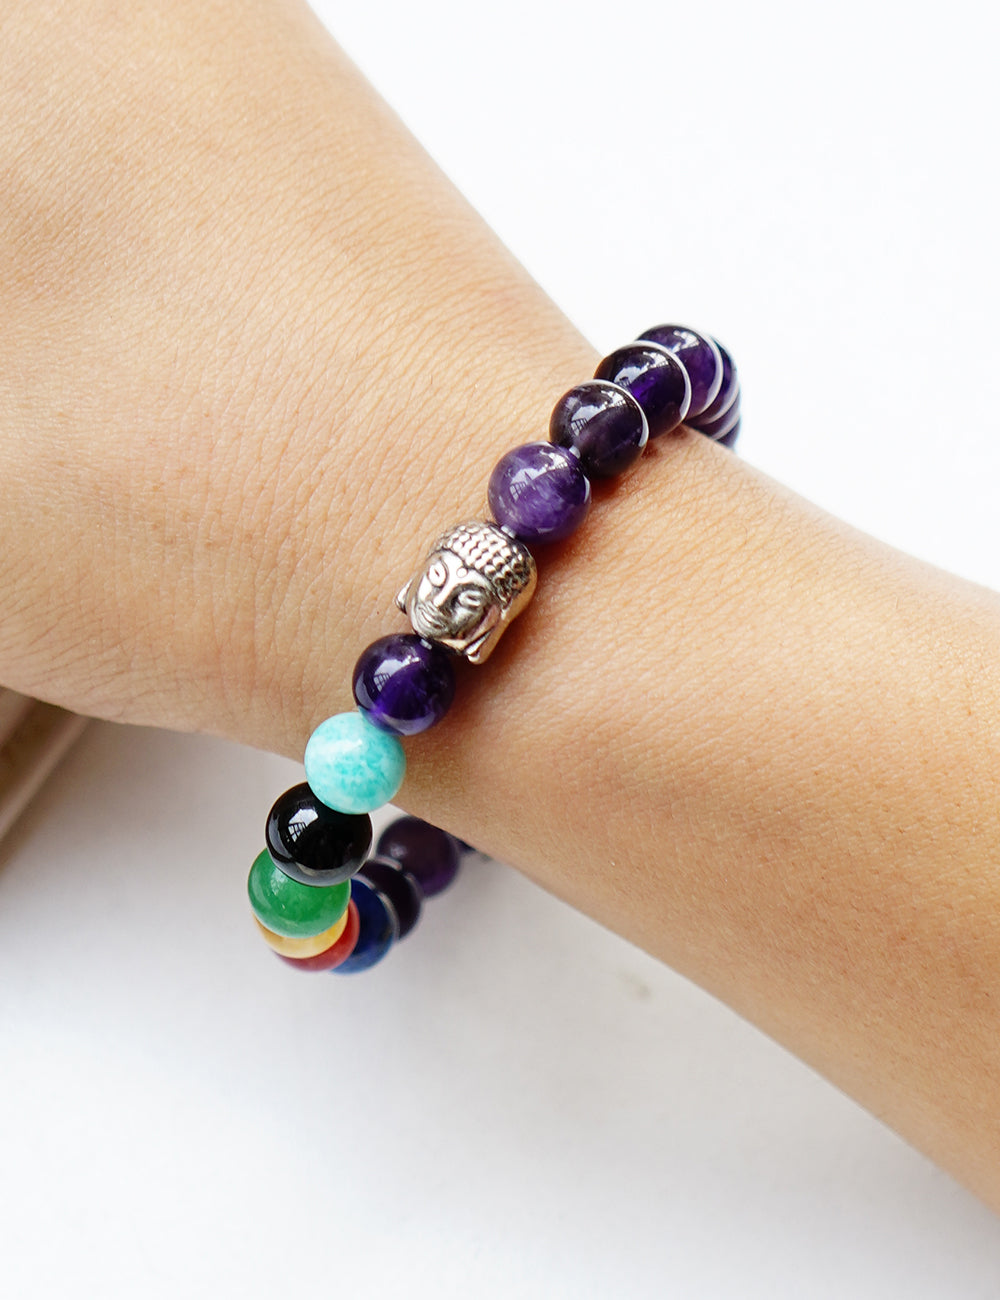 For overall Well-Being | Amethyst 7 chakra | Accessories with a Purpose